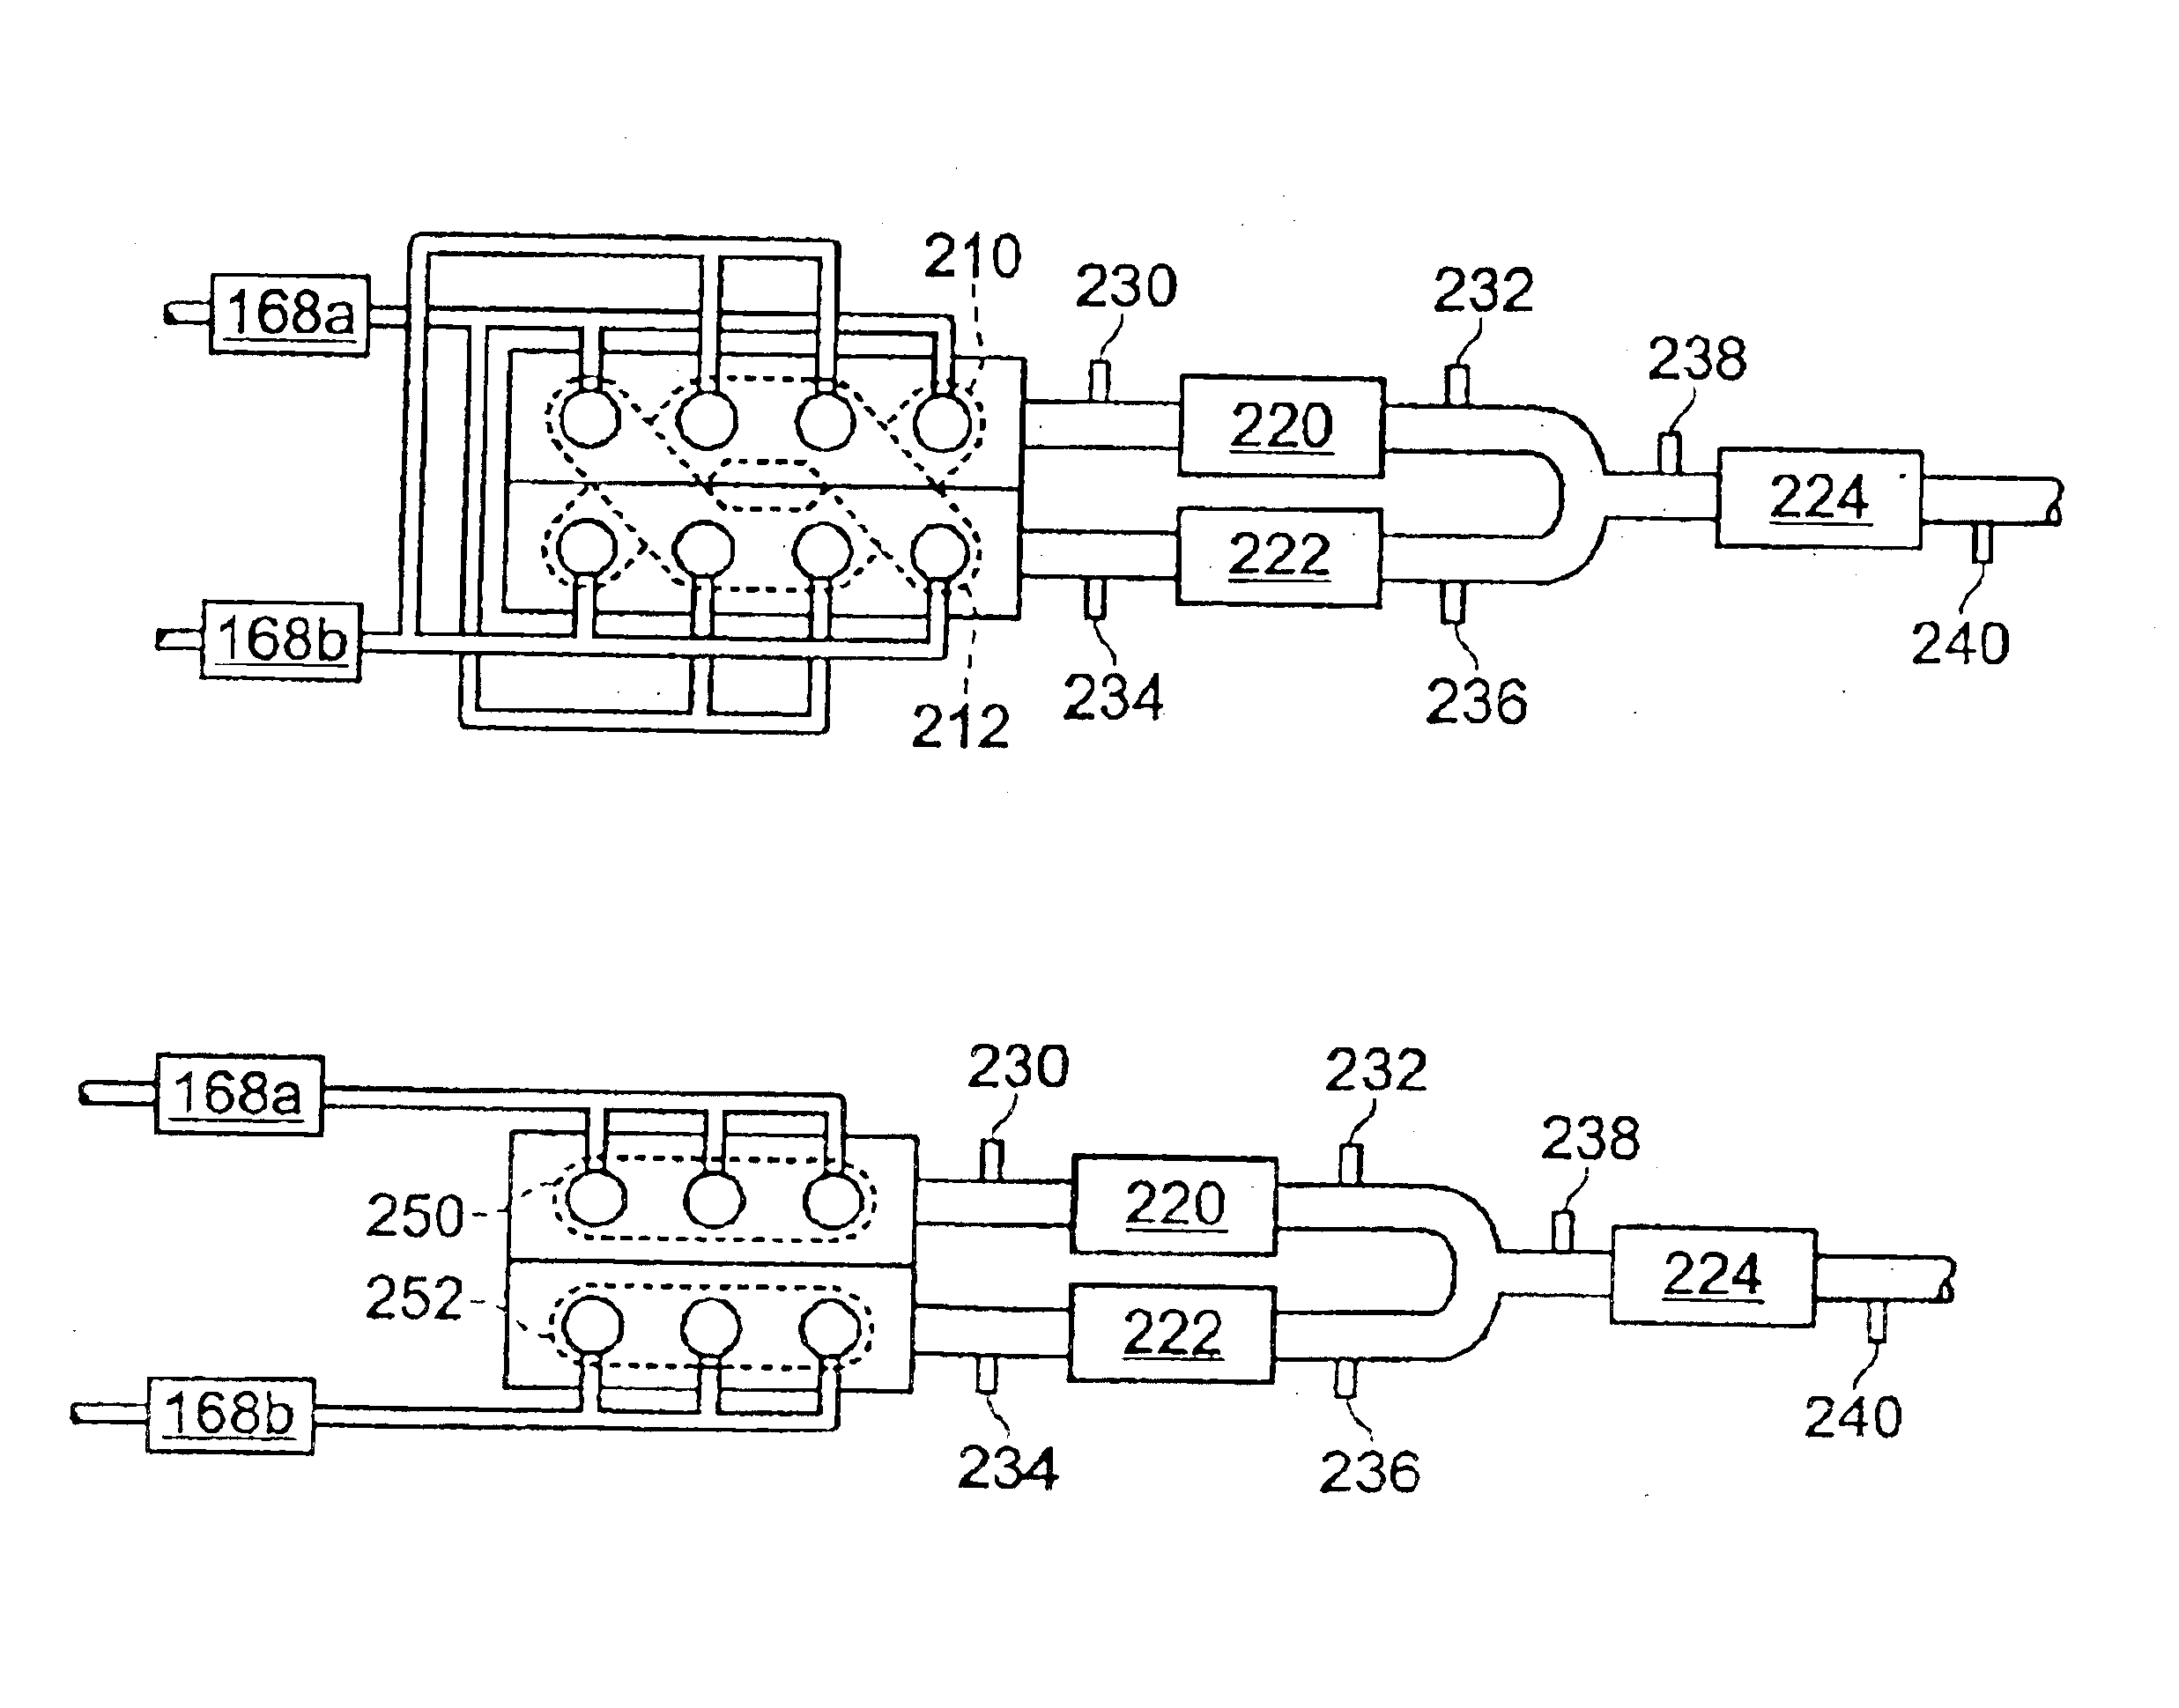 Engine system and dual fuel vapor purging system with cylinder deactivation